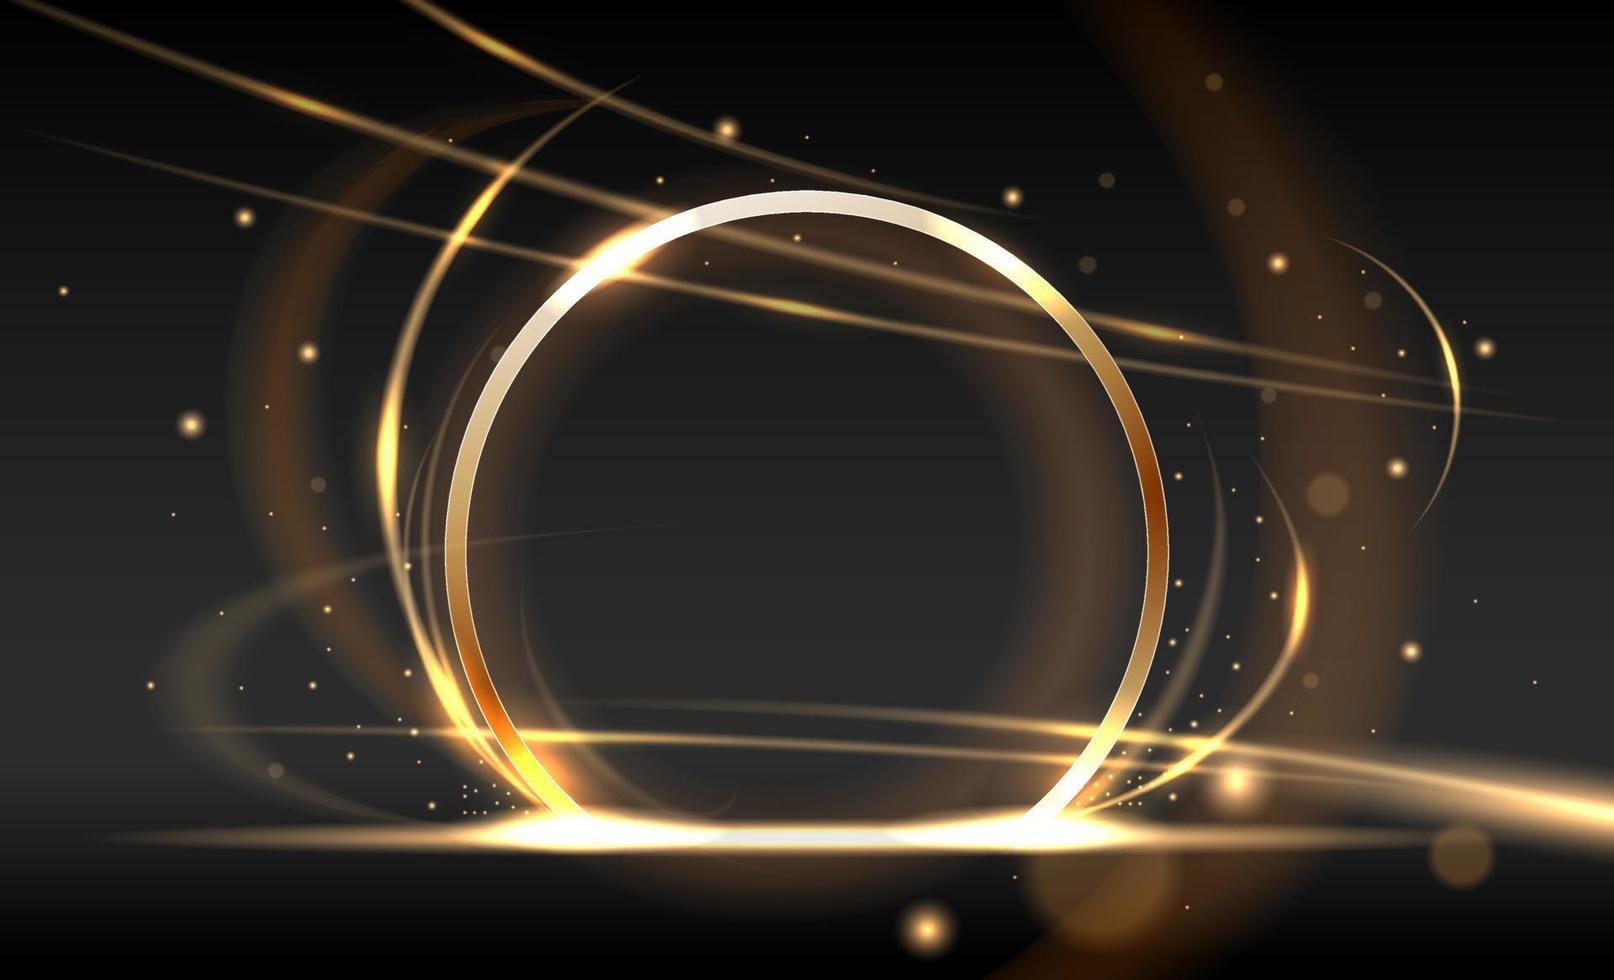 Abstract golden ring with light lines background. Rotating rings with shine rays. Vector illustration